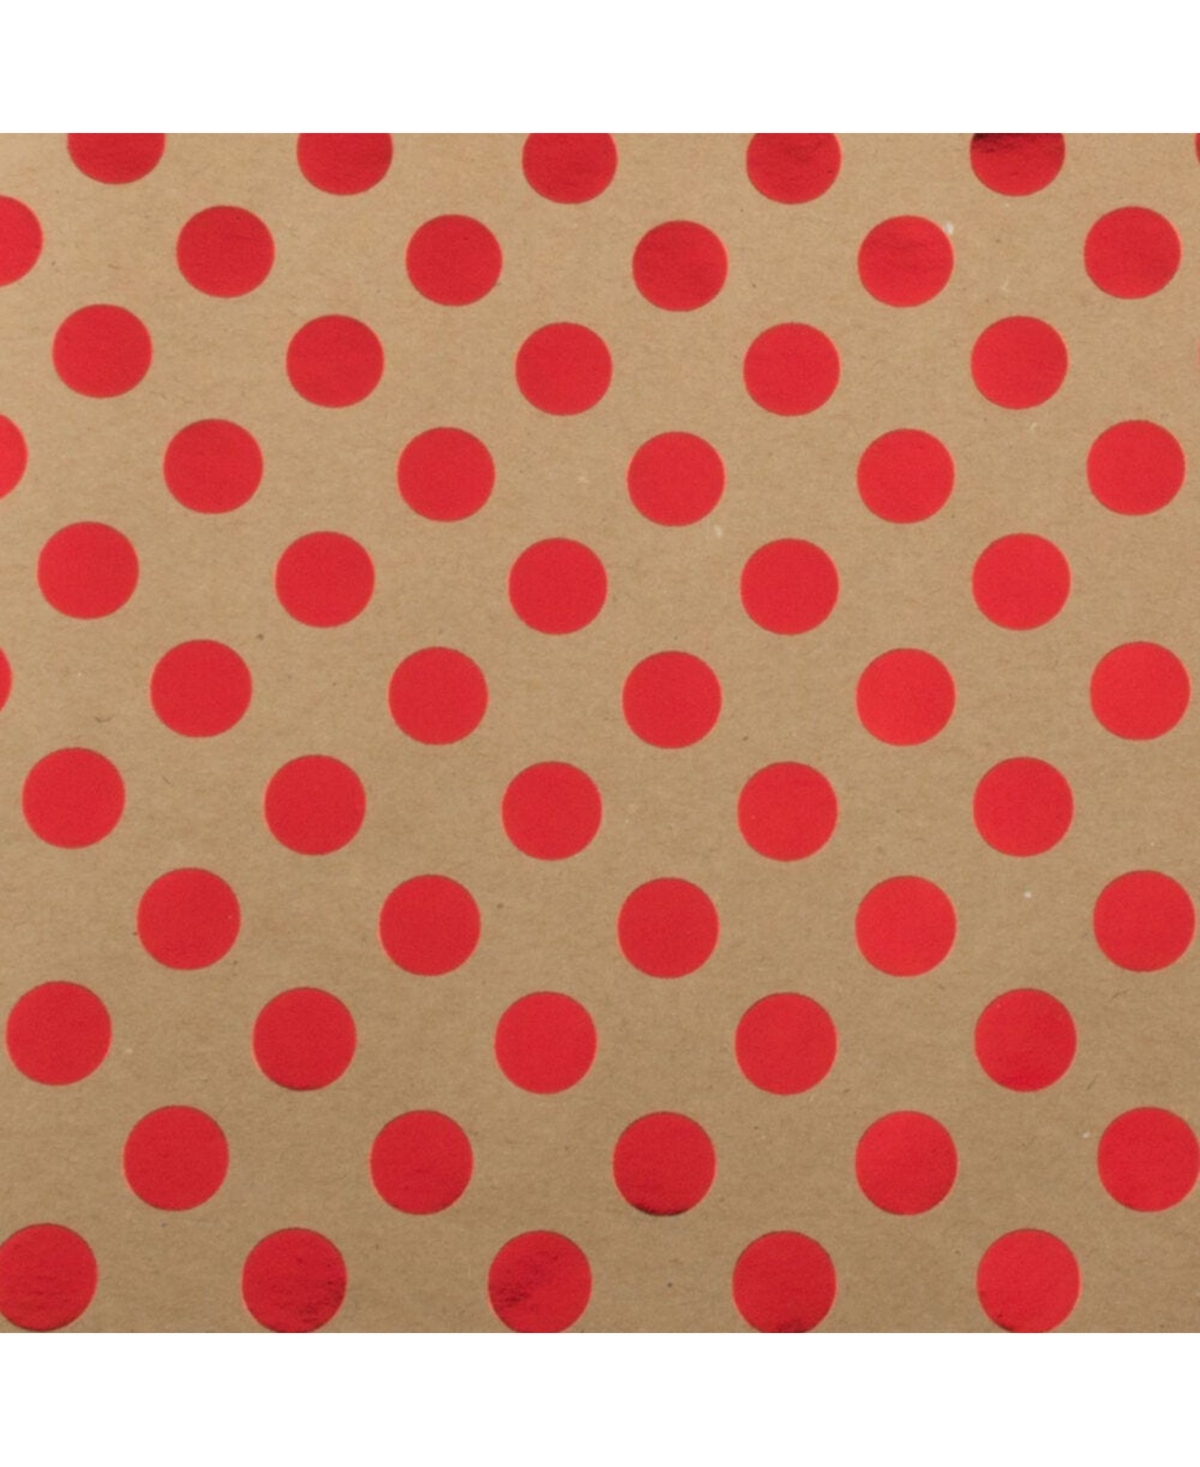 Jam Paper GiFoot Wrap - Kraft Wrapping Paper - 50 Square Foot Total - Foil  Polka Dots On Kraft Paper - Roll 2 Rolls Per Pack - Red Dots Kraft